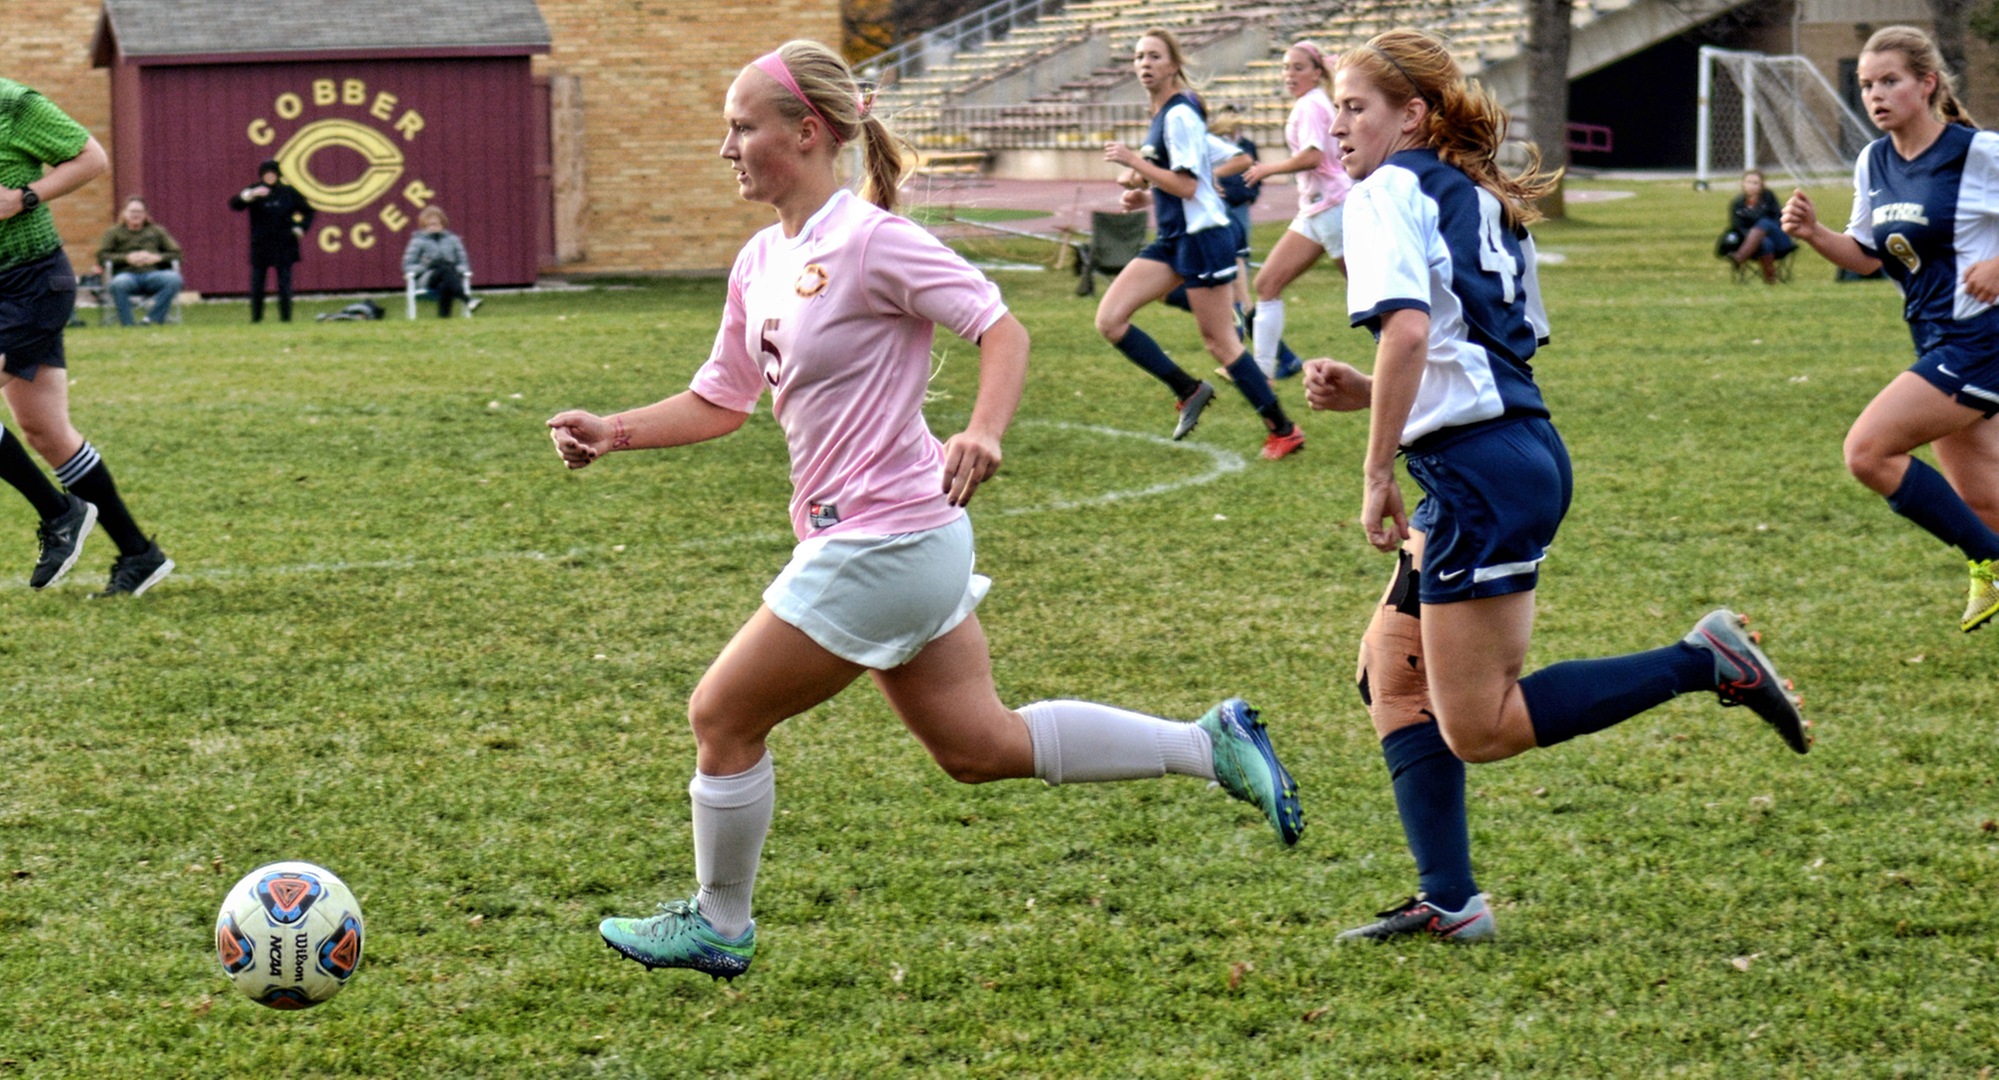 Junior defender Erin Eidsness dribbles the ball up the field during the Cobbers' game with Bethel.